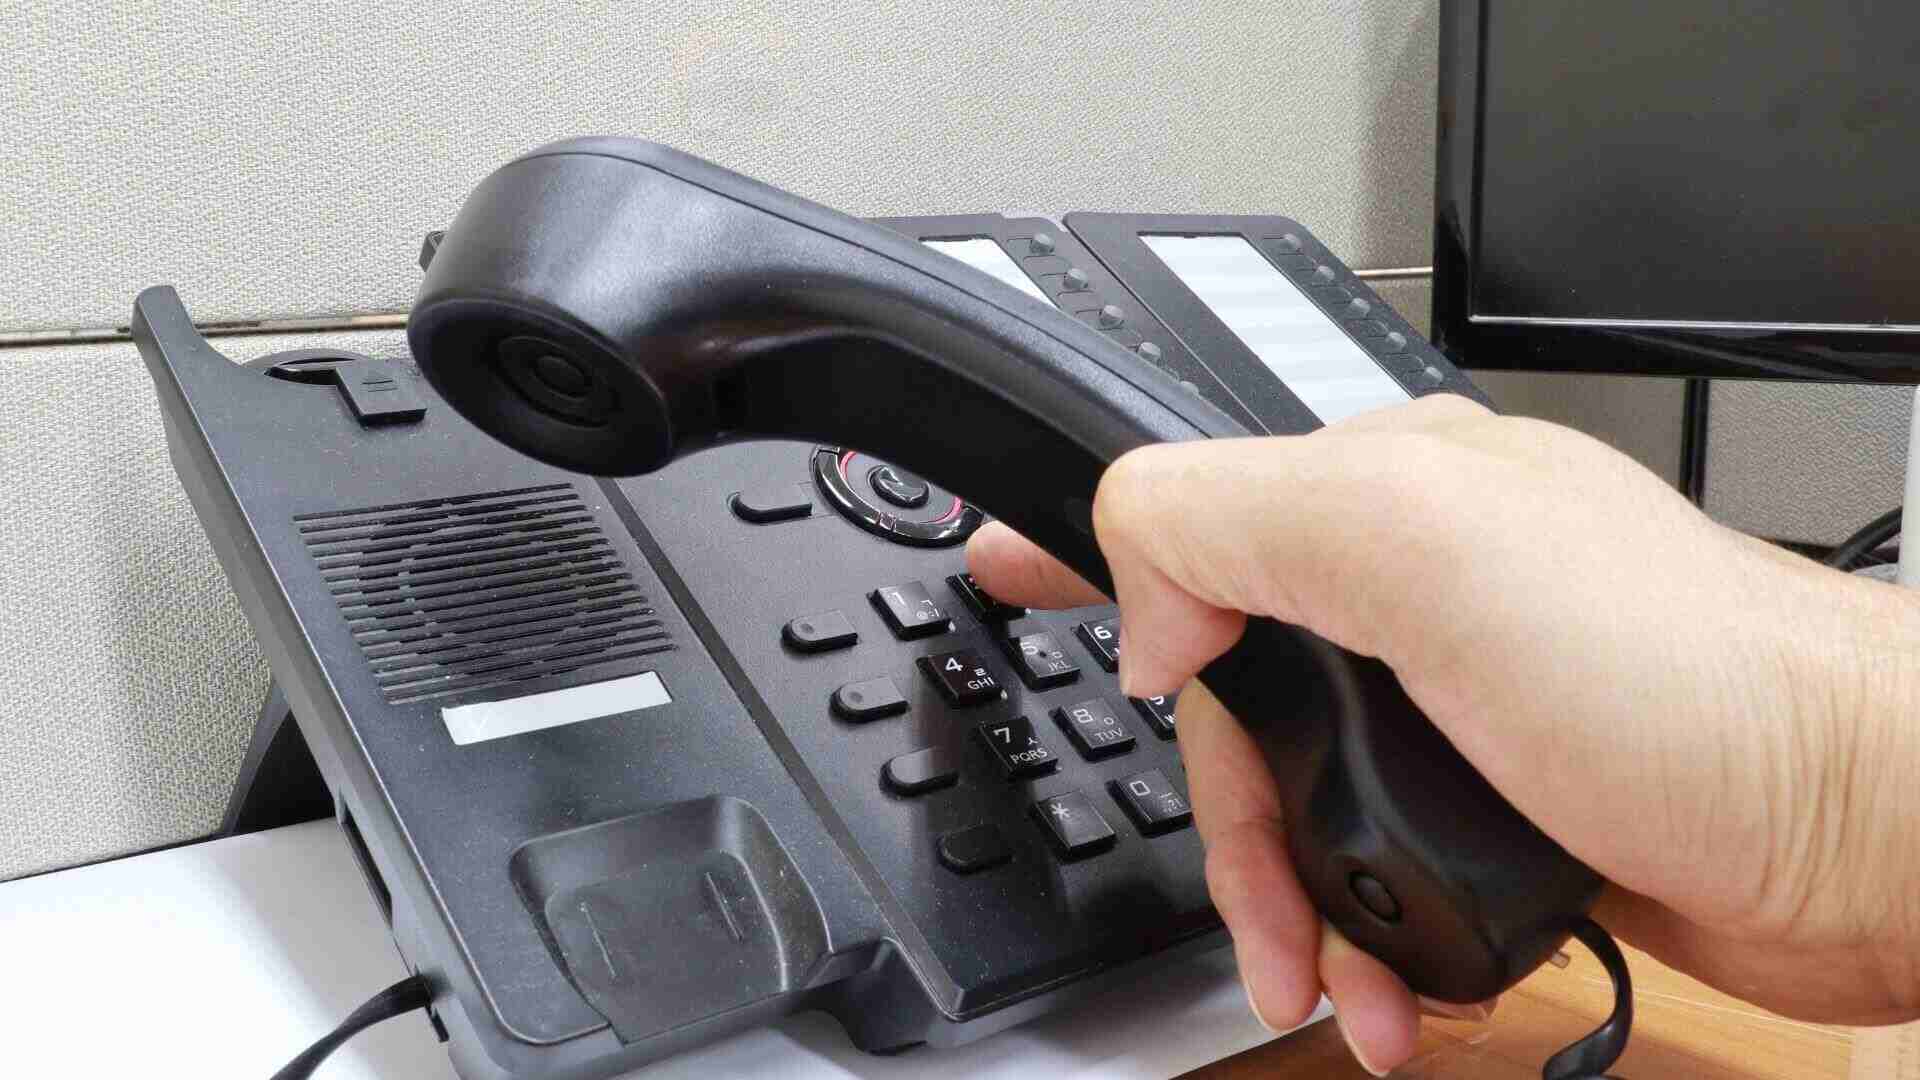 A landlord’s hand dials numbers into their desk landline while holding the attached phone.